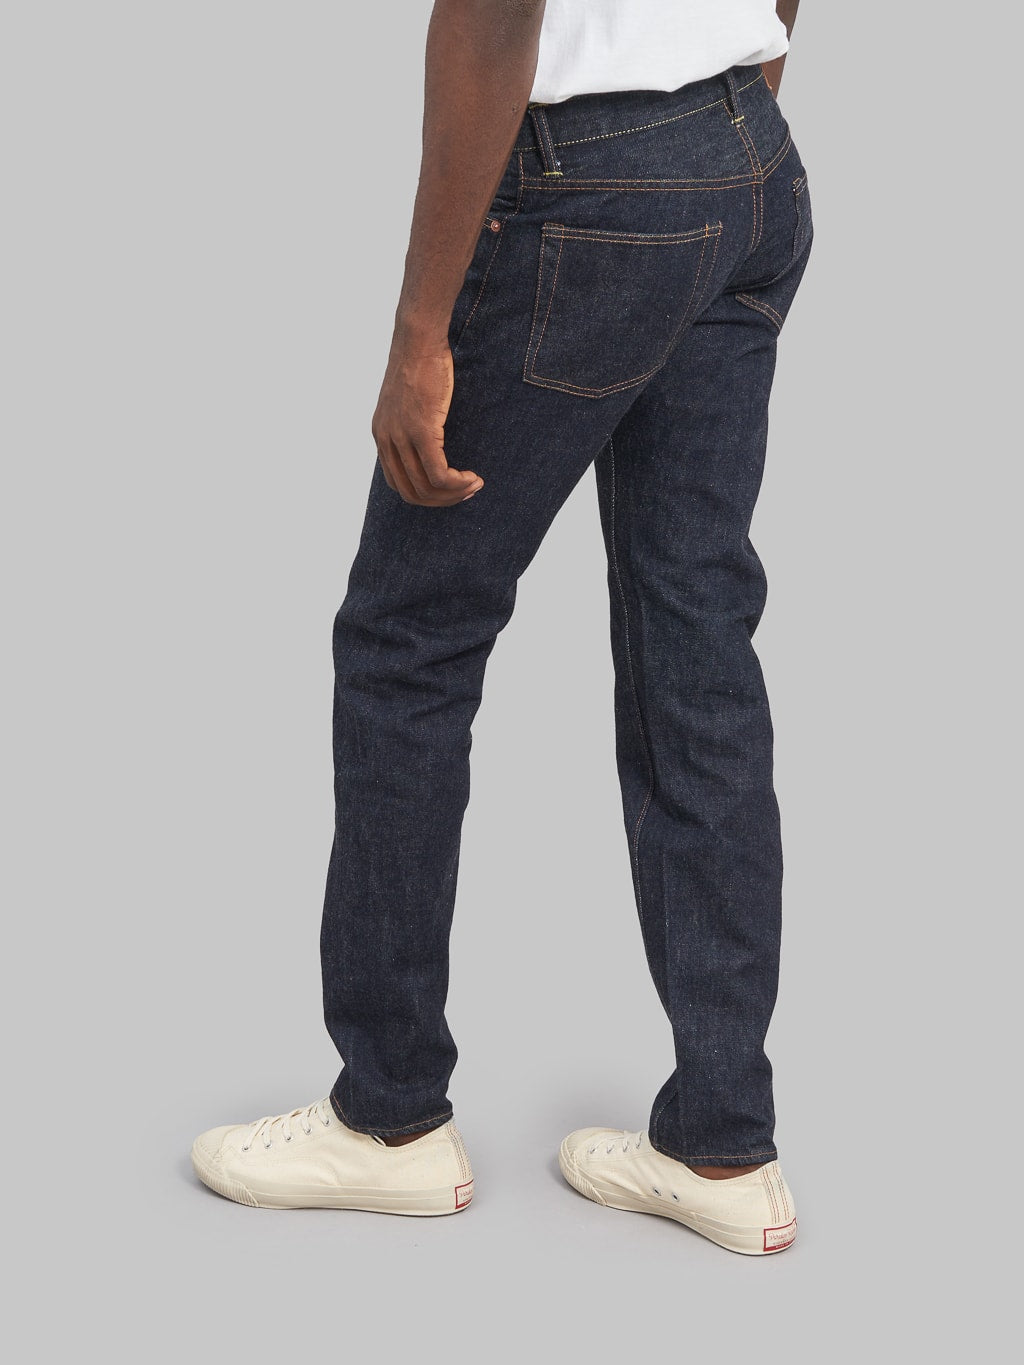 tcb 50s slim jeans t one wash style